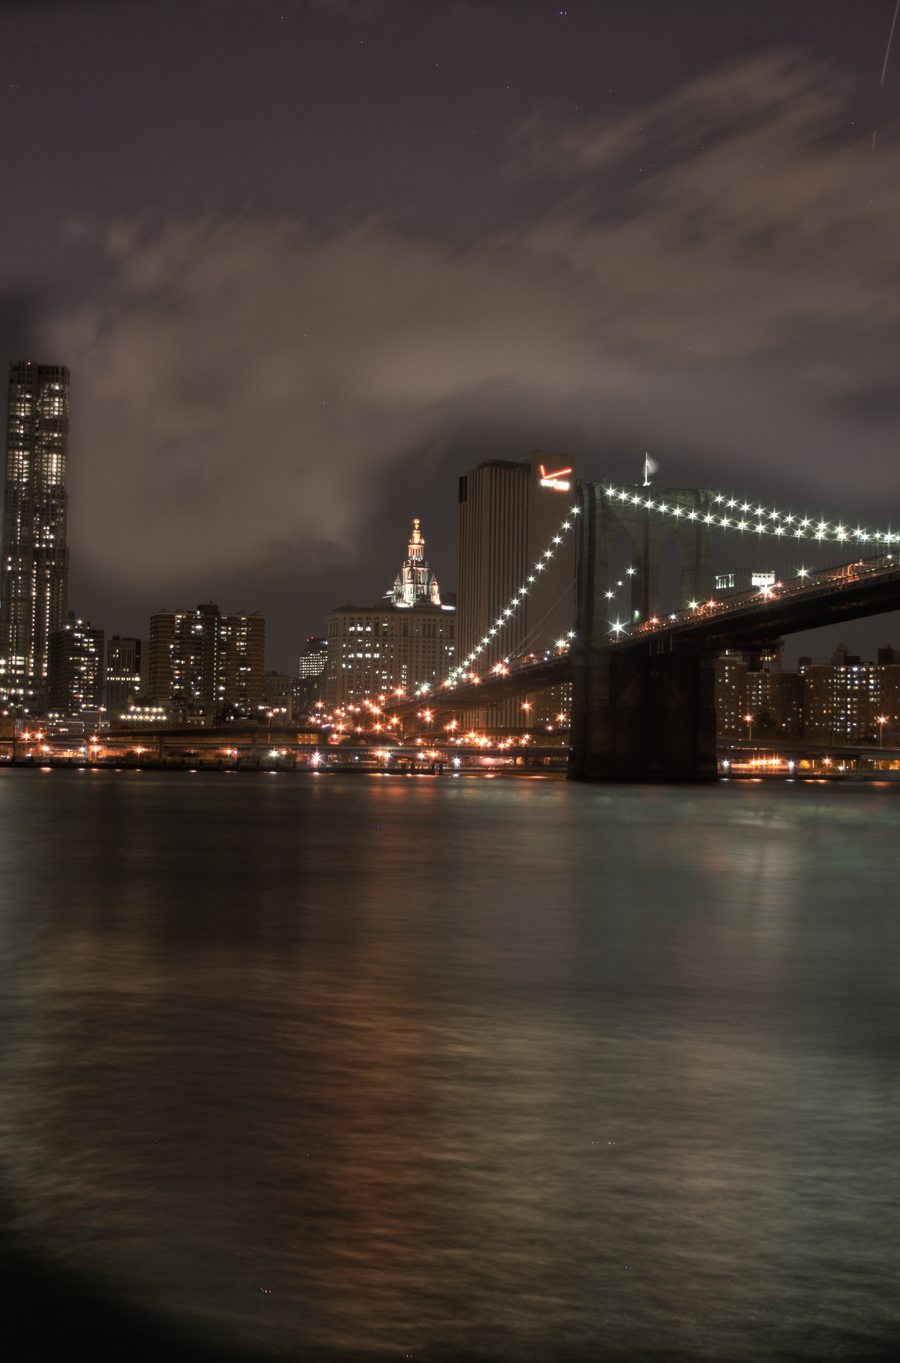 where_brooklyn_at__by_krew790-d38pmyl.png